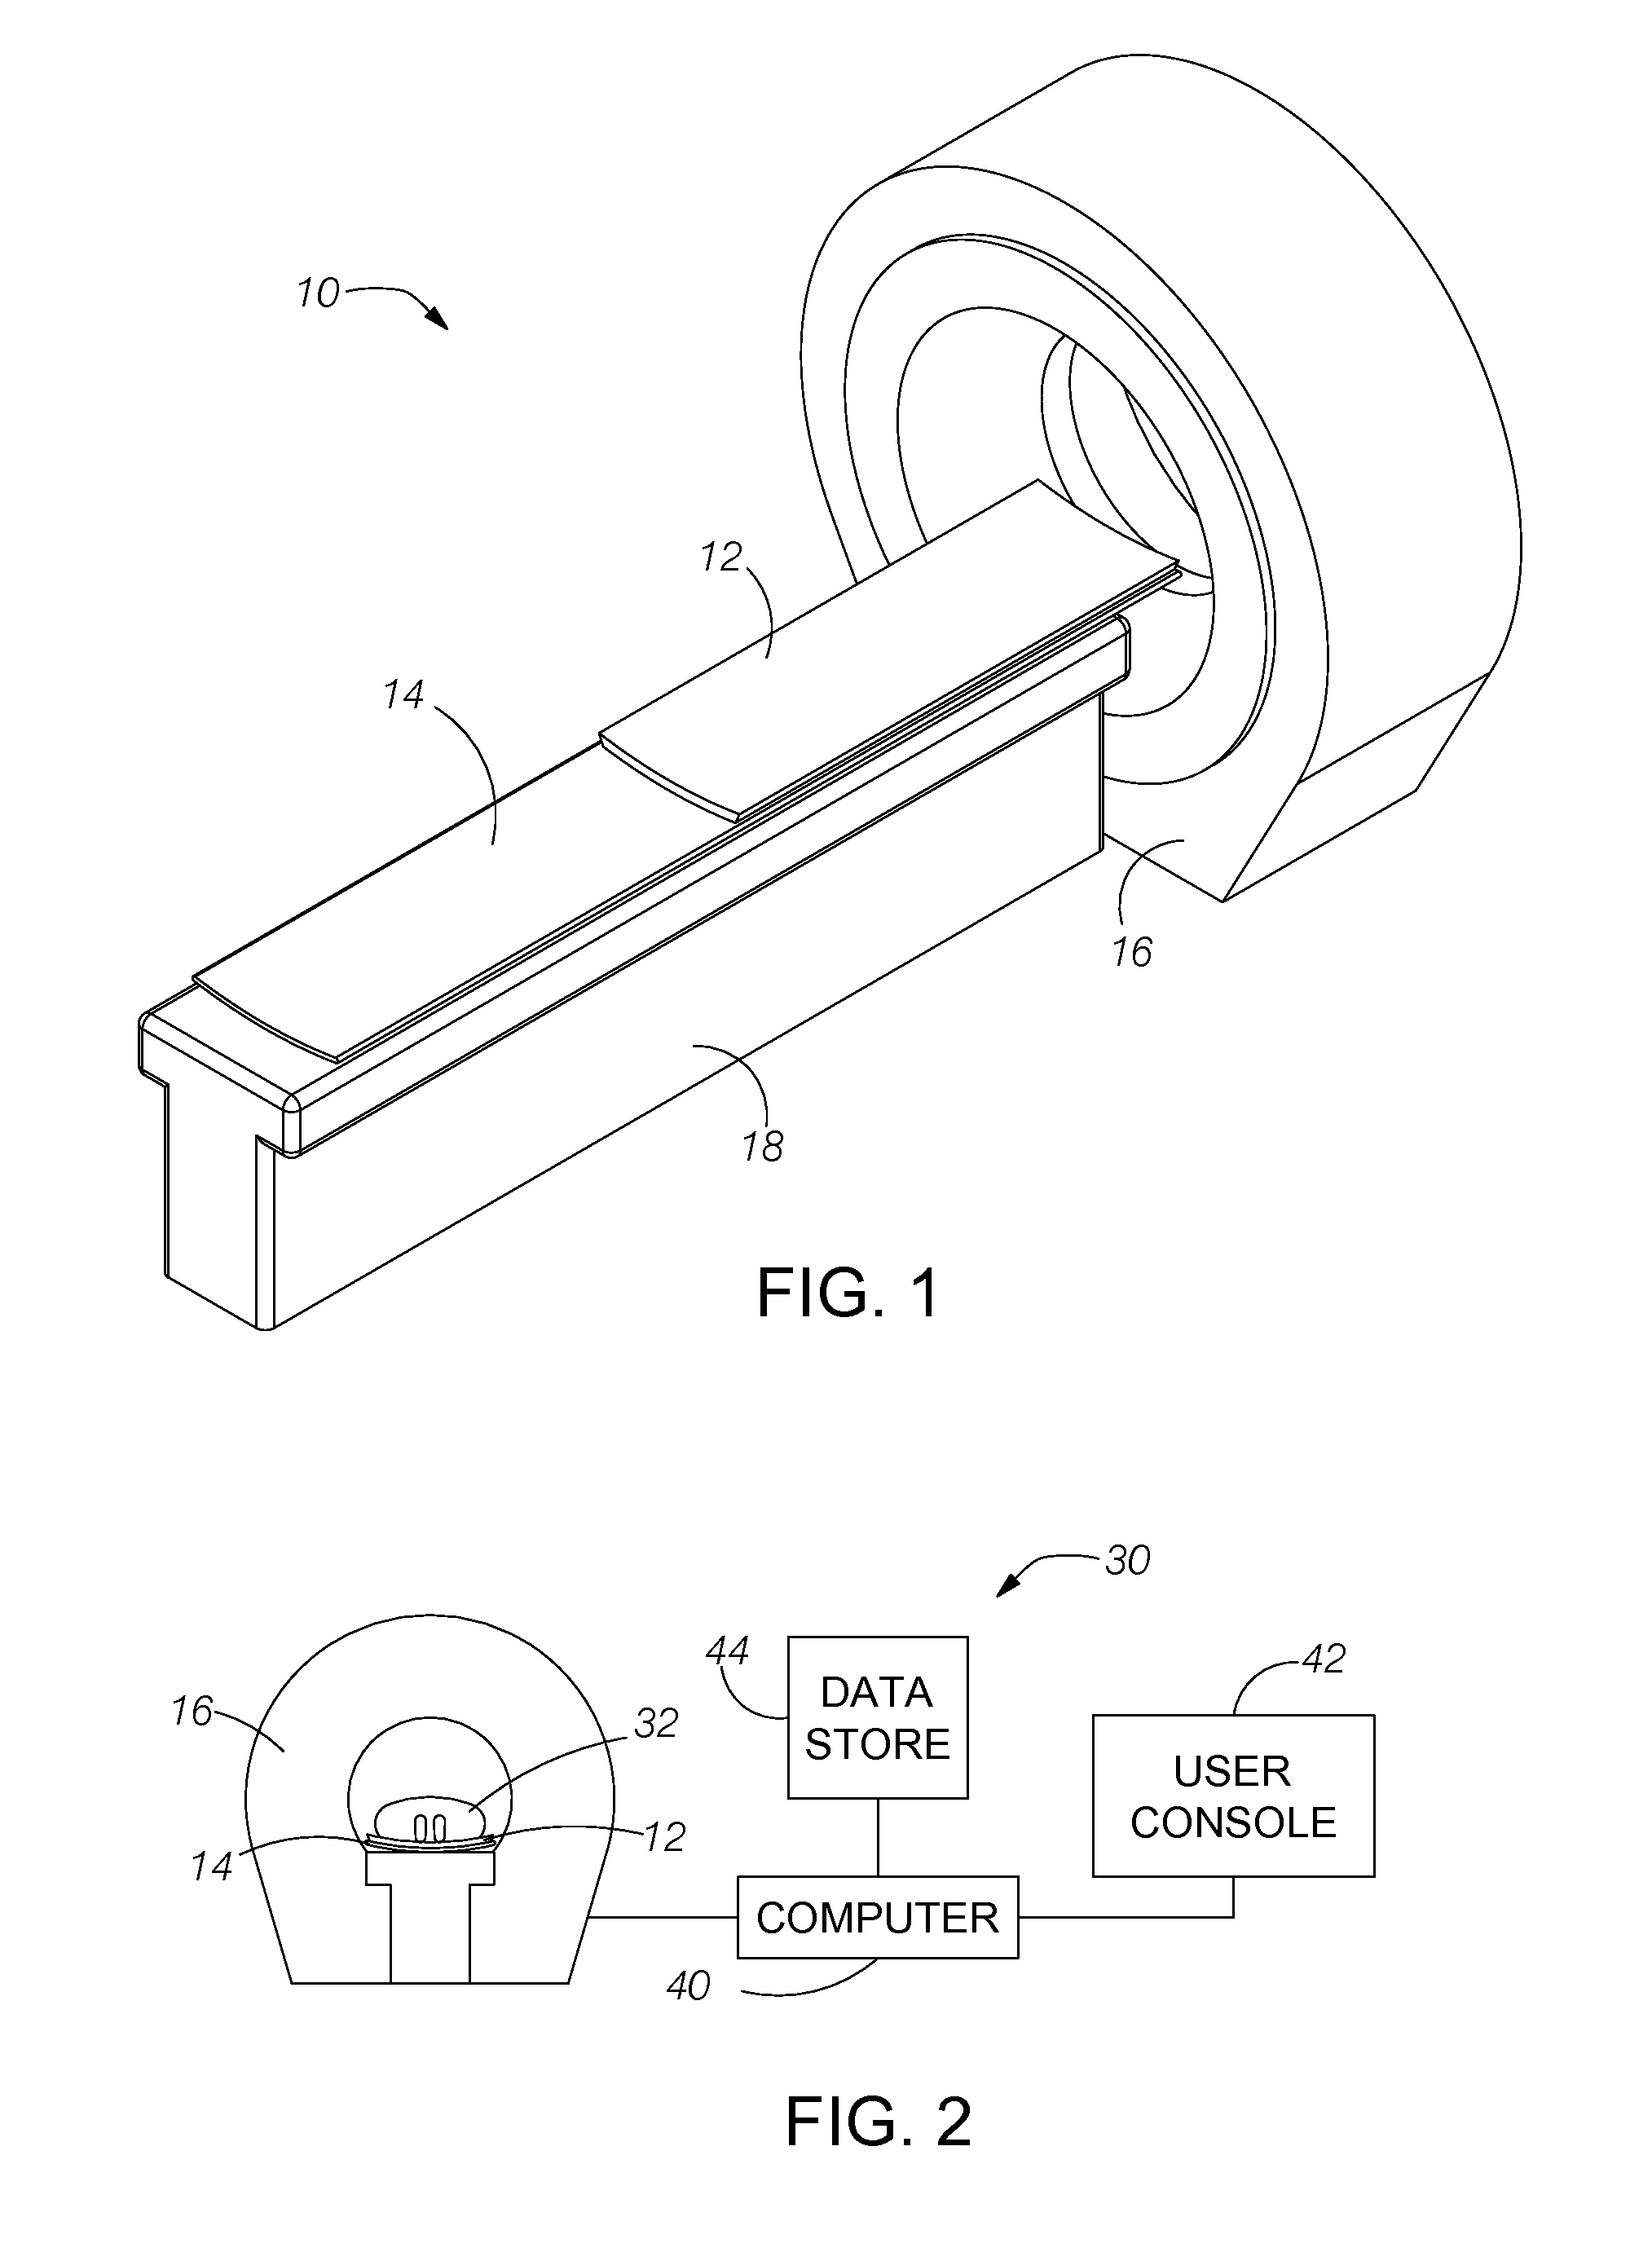 System and method for calibration of CT scanners and display of images in density units without the use of water phantoms